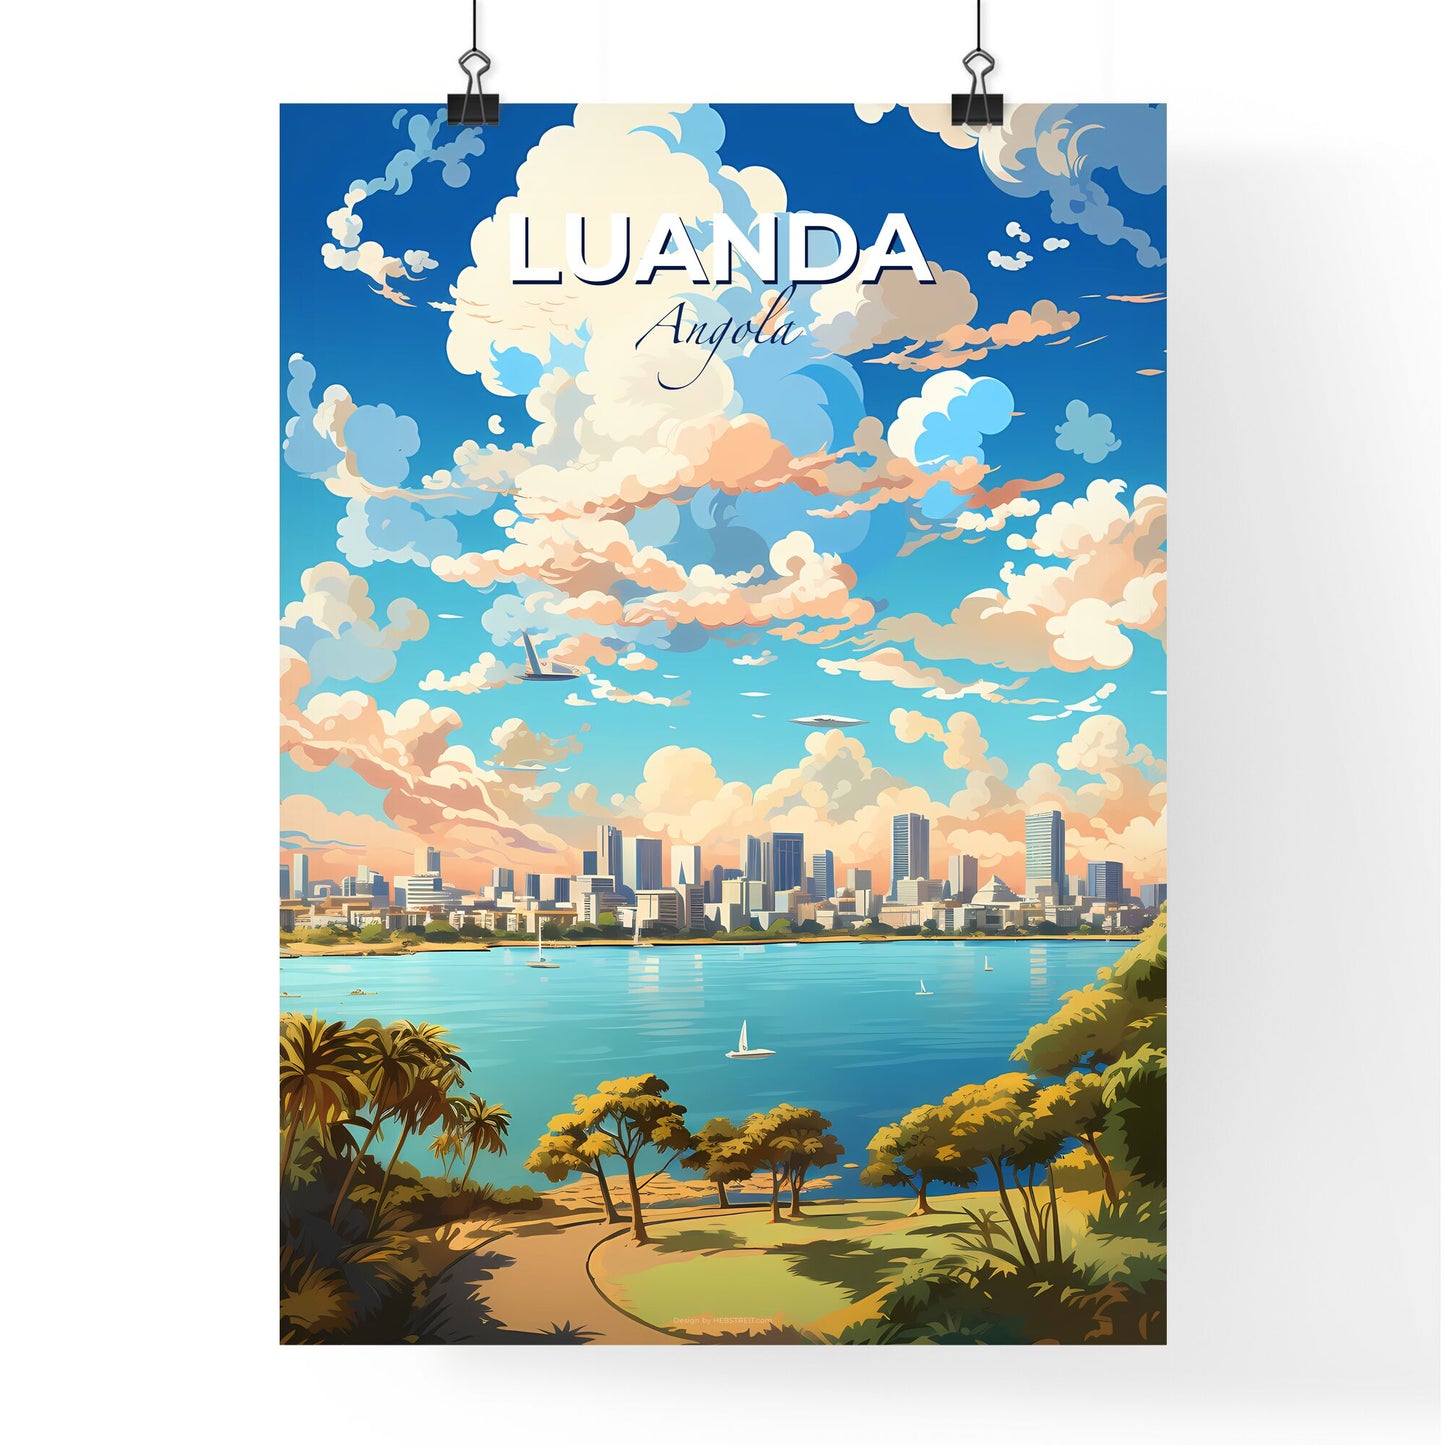 Luanda Angola Skyline - A City By The Water - Customizable Travel Gift Default Title